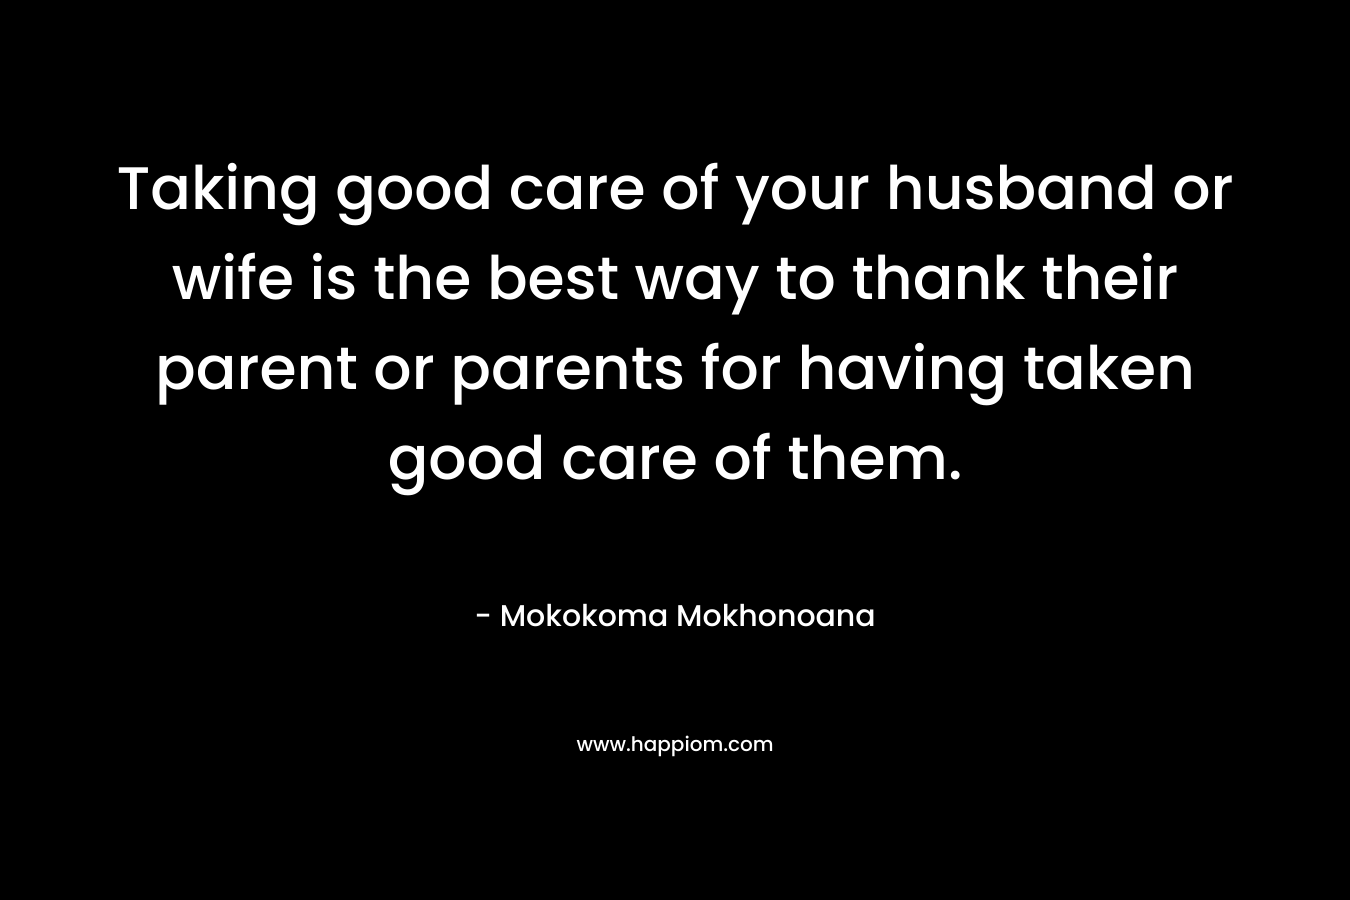 Taking good care of your husband or wife is the best way to thank their parent or parents for having taken good care of them.